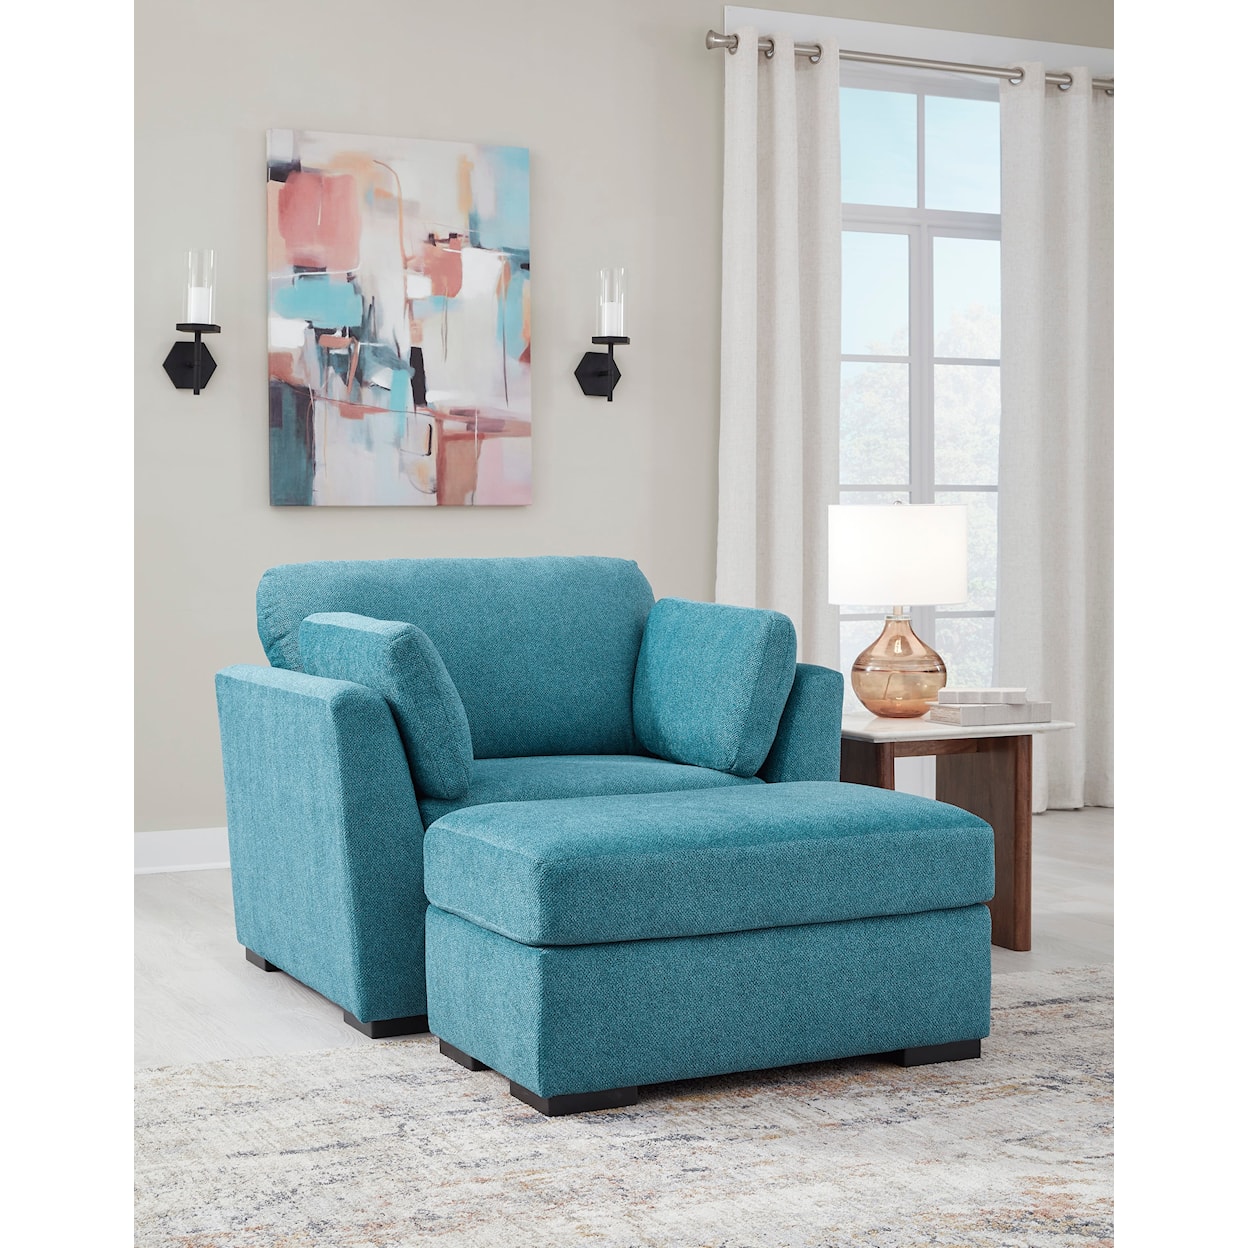 Ashley Furniture Signature Design Keerwick Oversized Chair And Ottoman